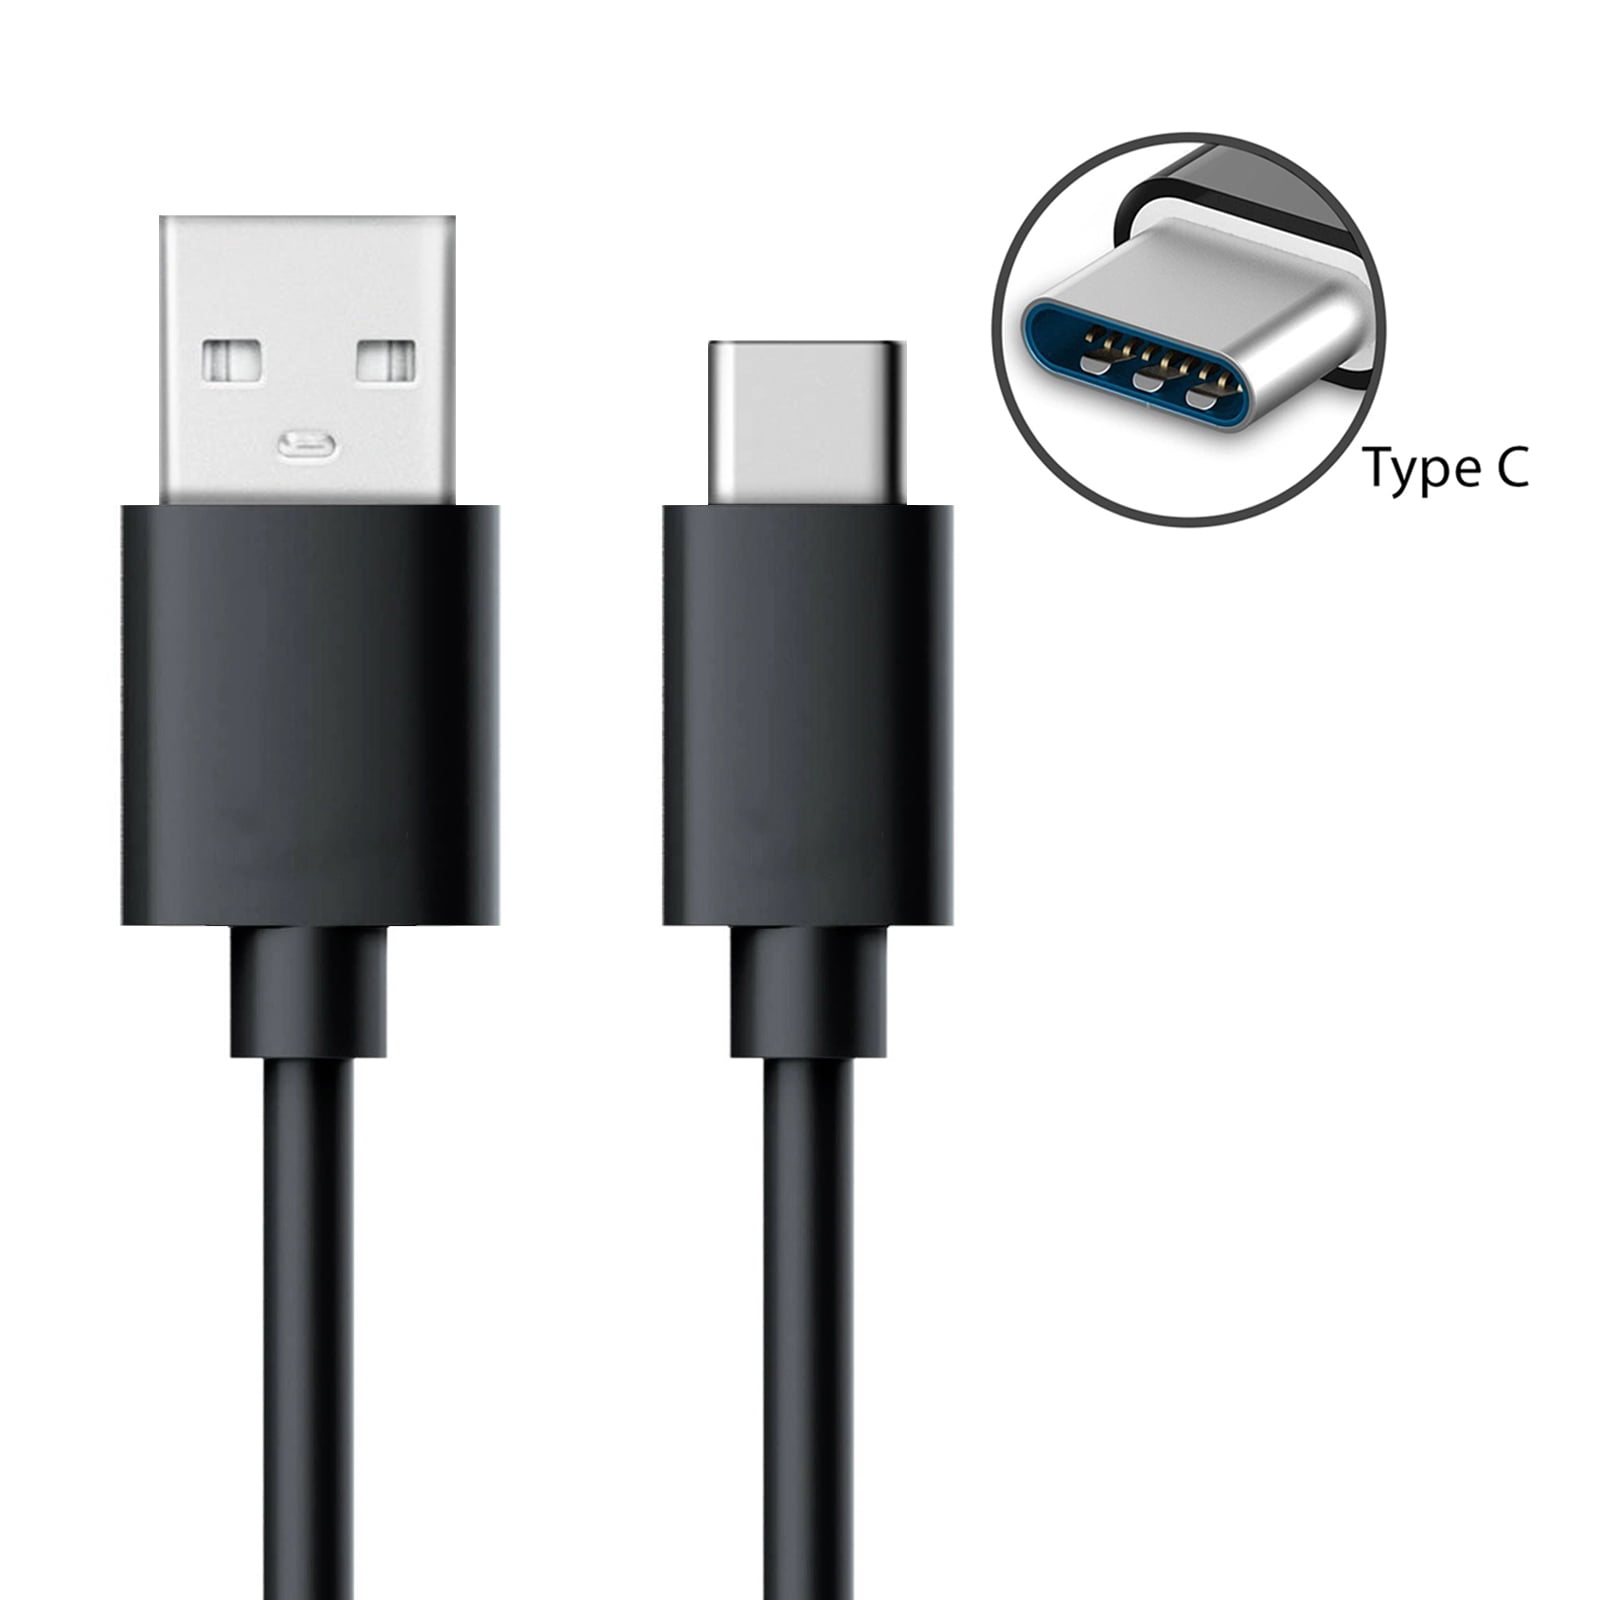 USB Power Adapter Charger Charging Data Sync Cable Cord For Elephone S8 